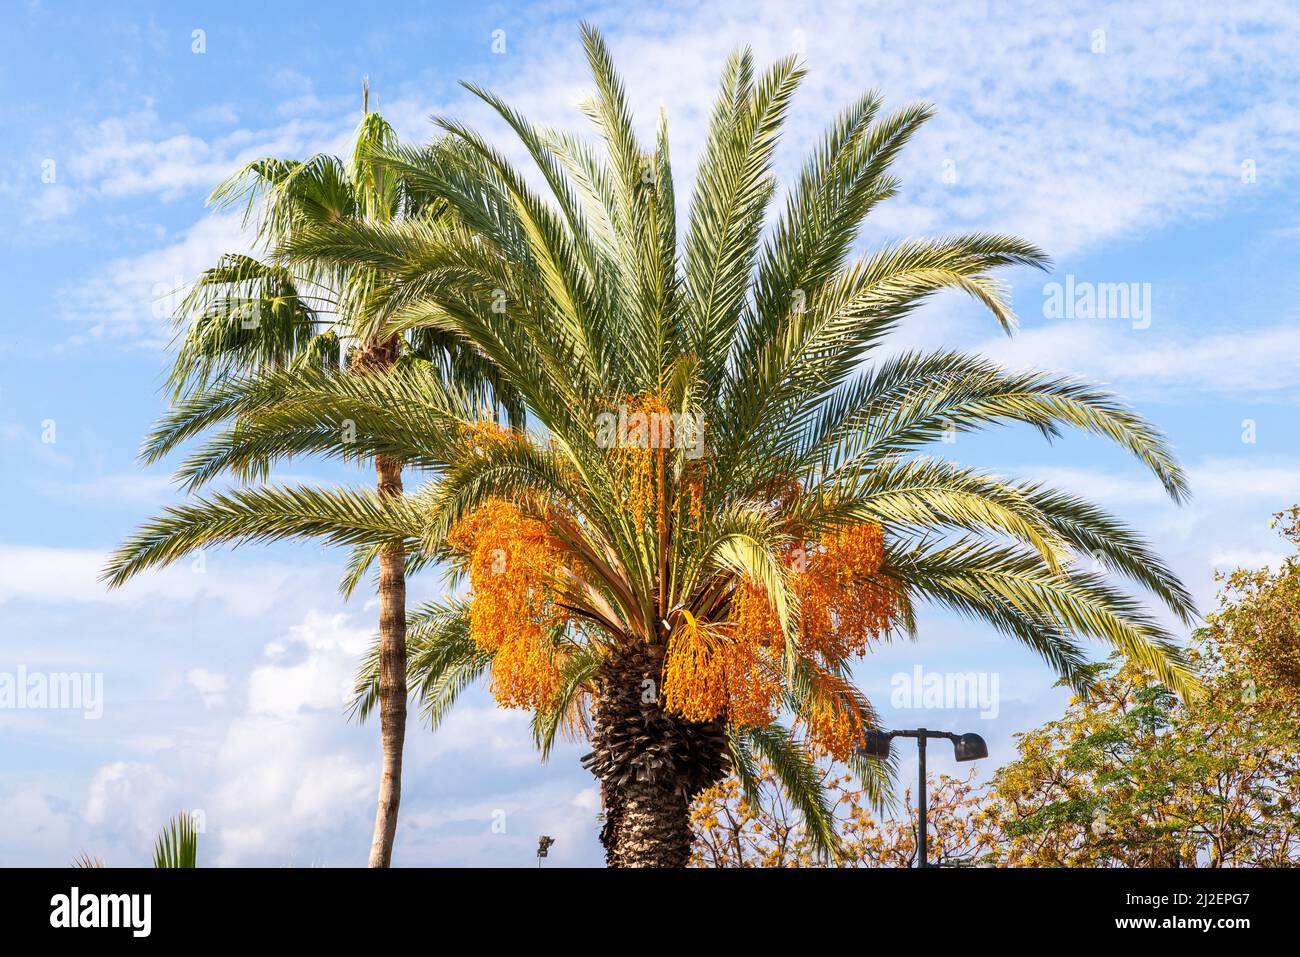 Pindo jelly palm or Butia capitata yellow fruits hanging from a tree. Stock Photo